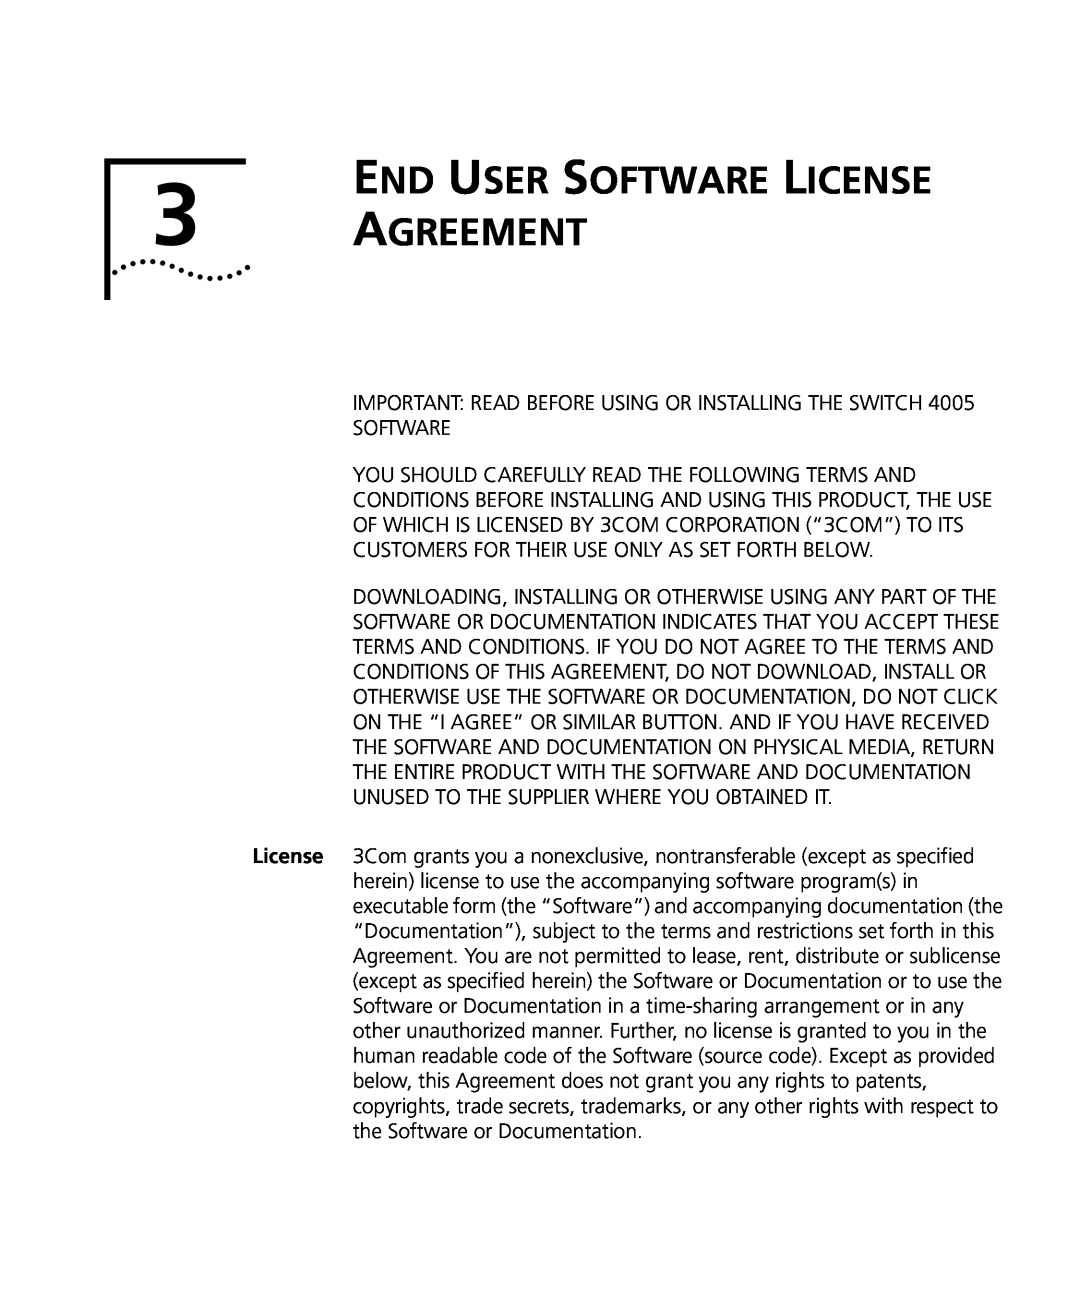 3Com 4005 manual END USER SOFTWARE LICENSE 3 AGREEMENT, Important Read Before Using Or Installing The Switch Software 